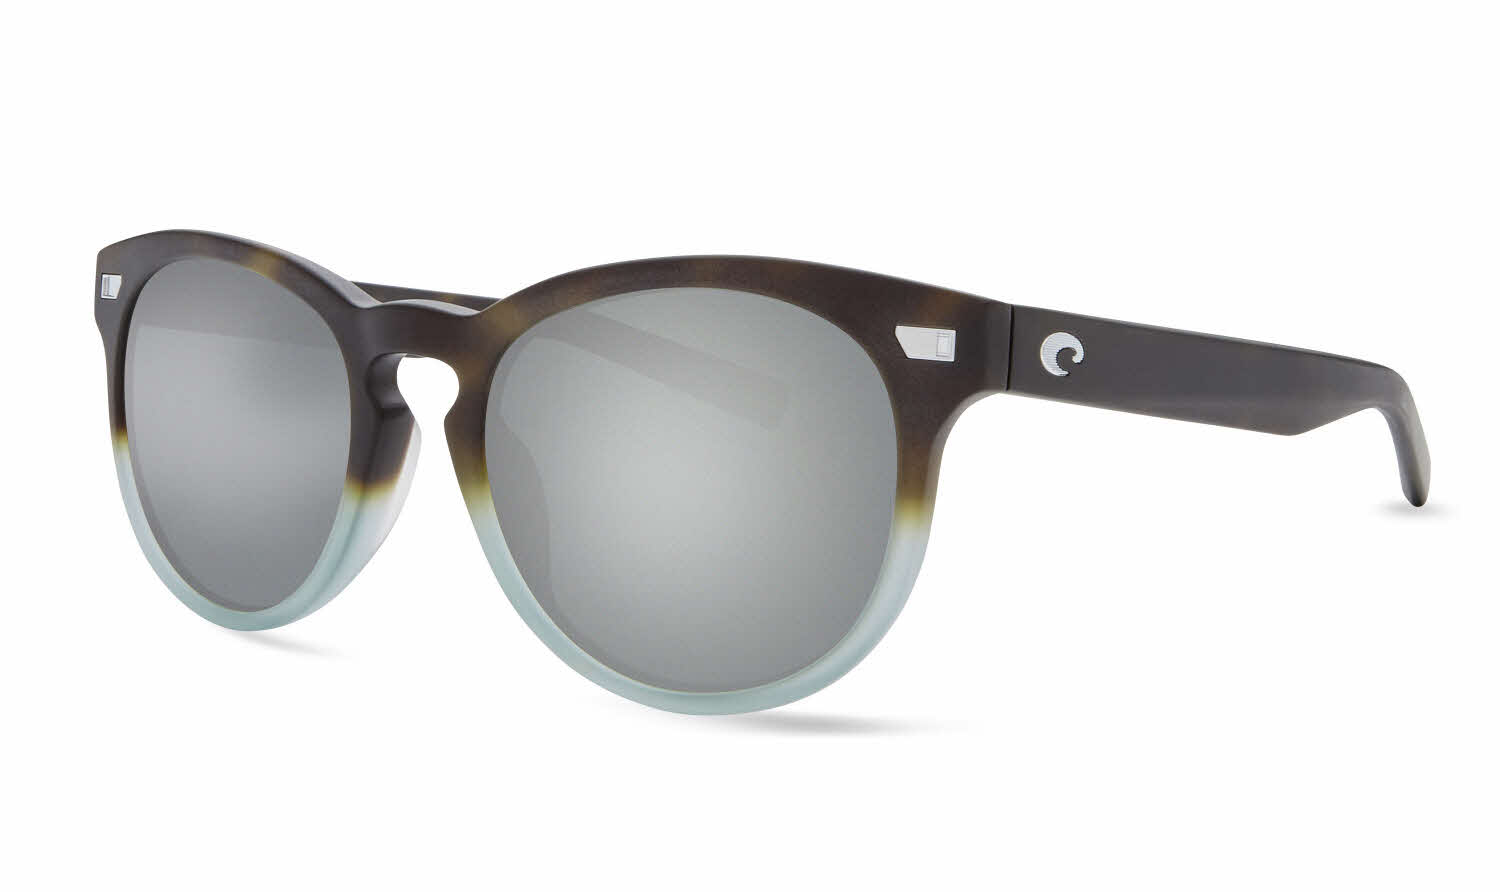 Best Polarized Sunglasses Brands and Styles  Oakley, Costa Del Mar, Ray  Ban & More 